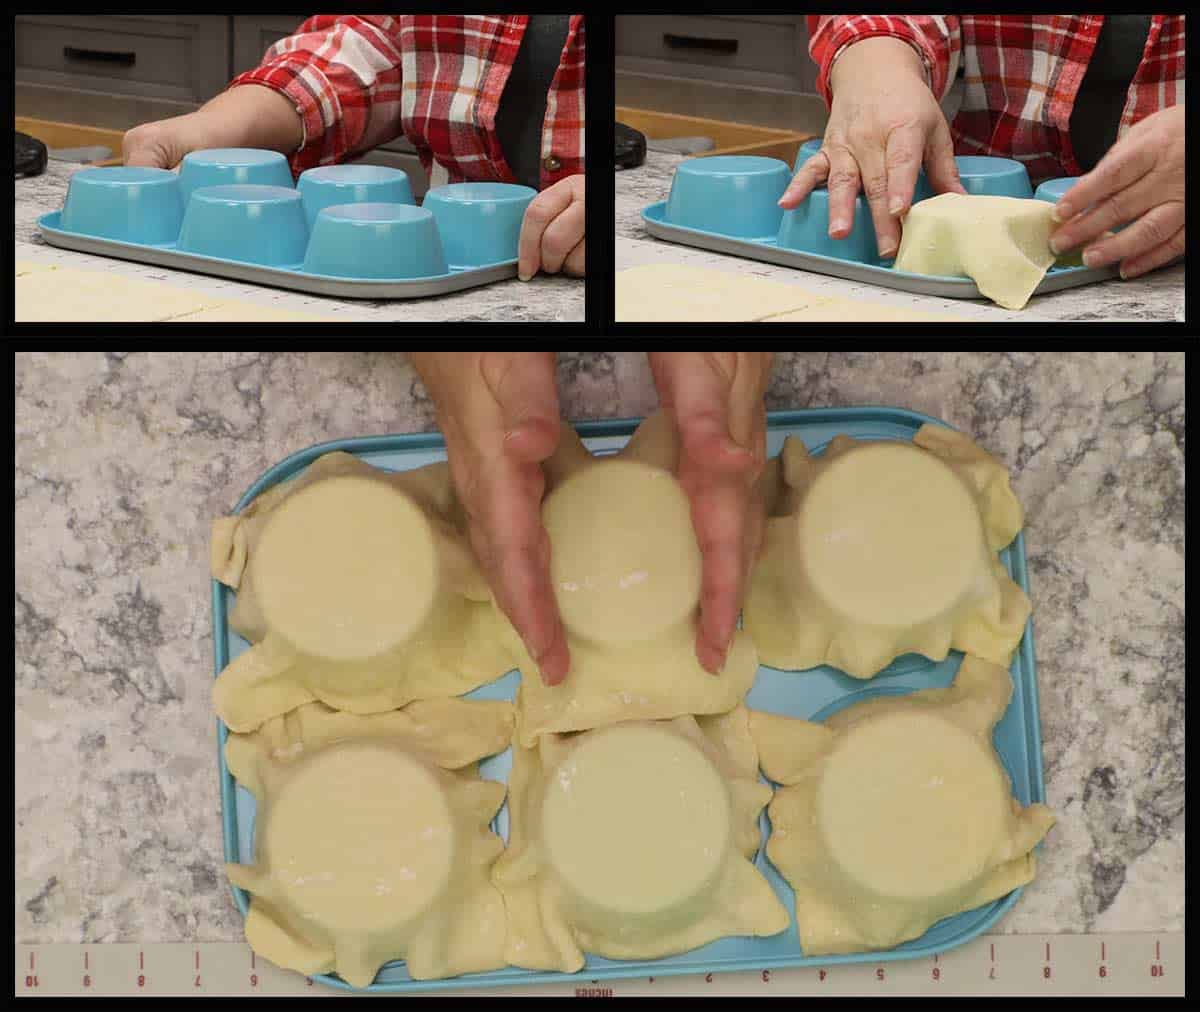 draping the squares of puff pastry over the muffin tin wells. 